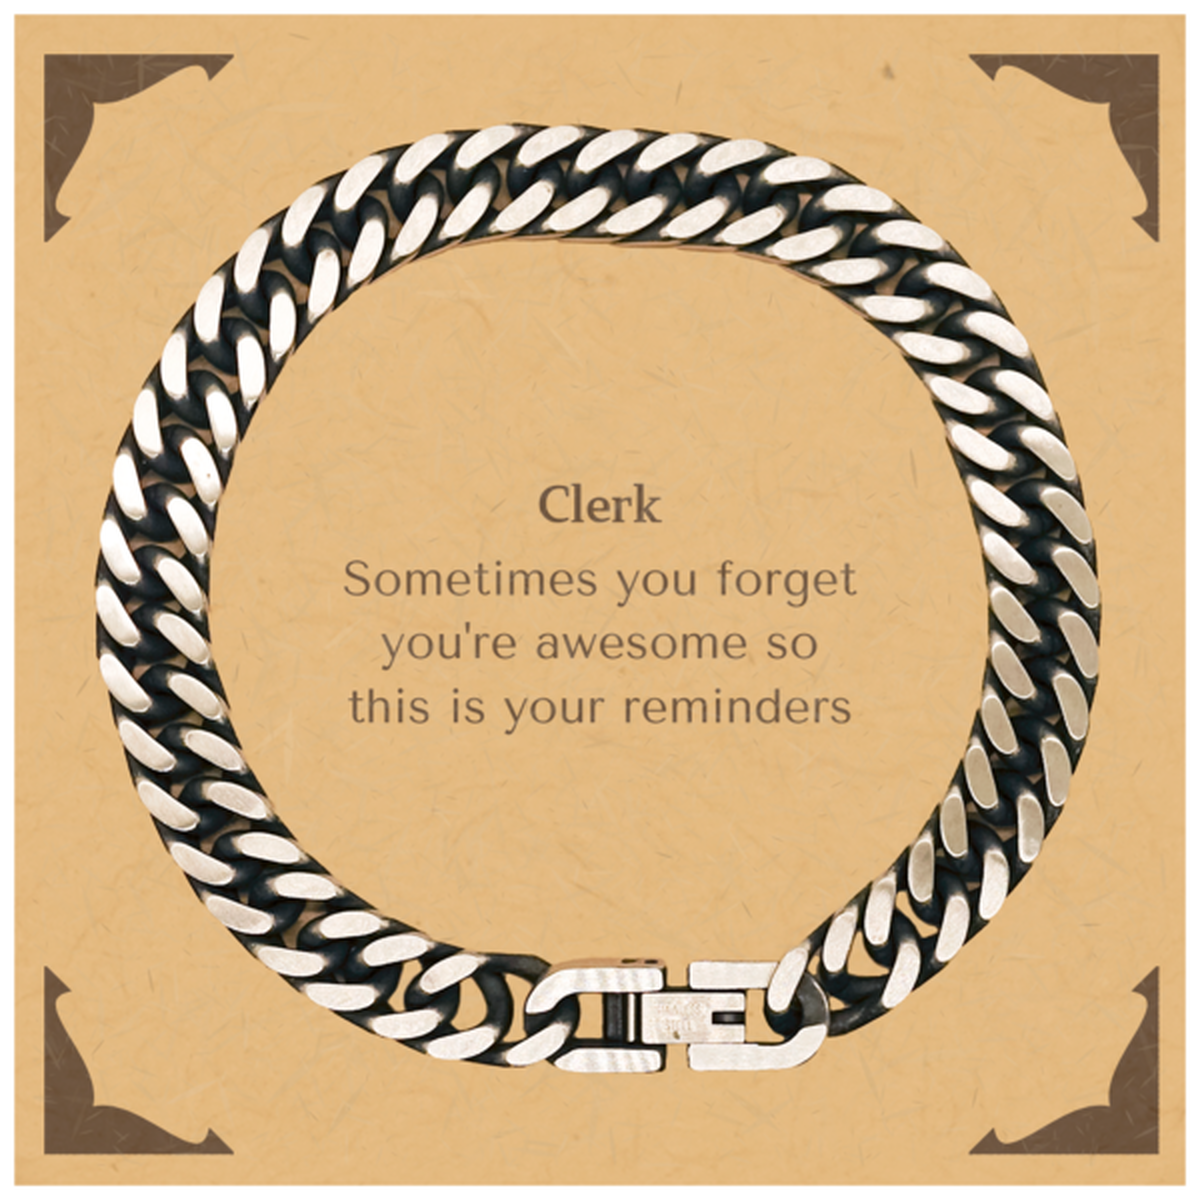 Sentimental Clerk Cuban Link Chain Bracelet, Clerk Sometimes you forget you're awesome so this is your reminders, Graduation Christmas Birthday Gifts for Clerk, Men, Women, Coworkers